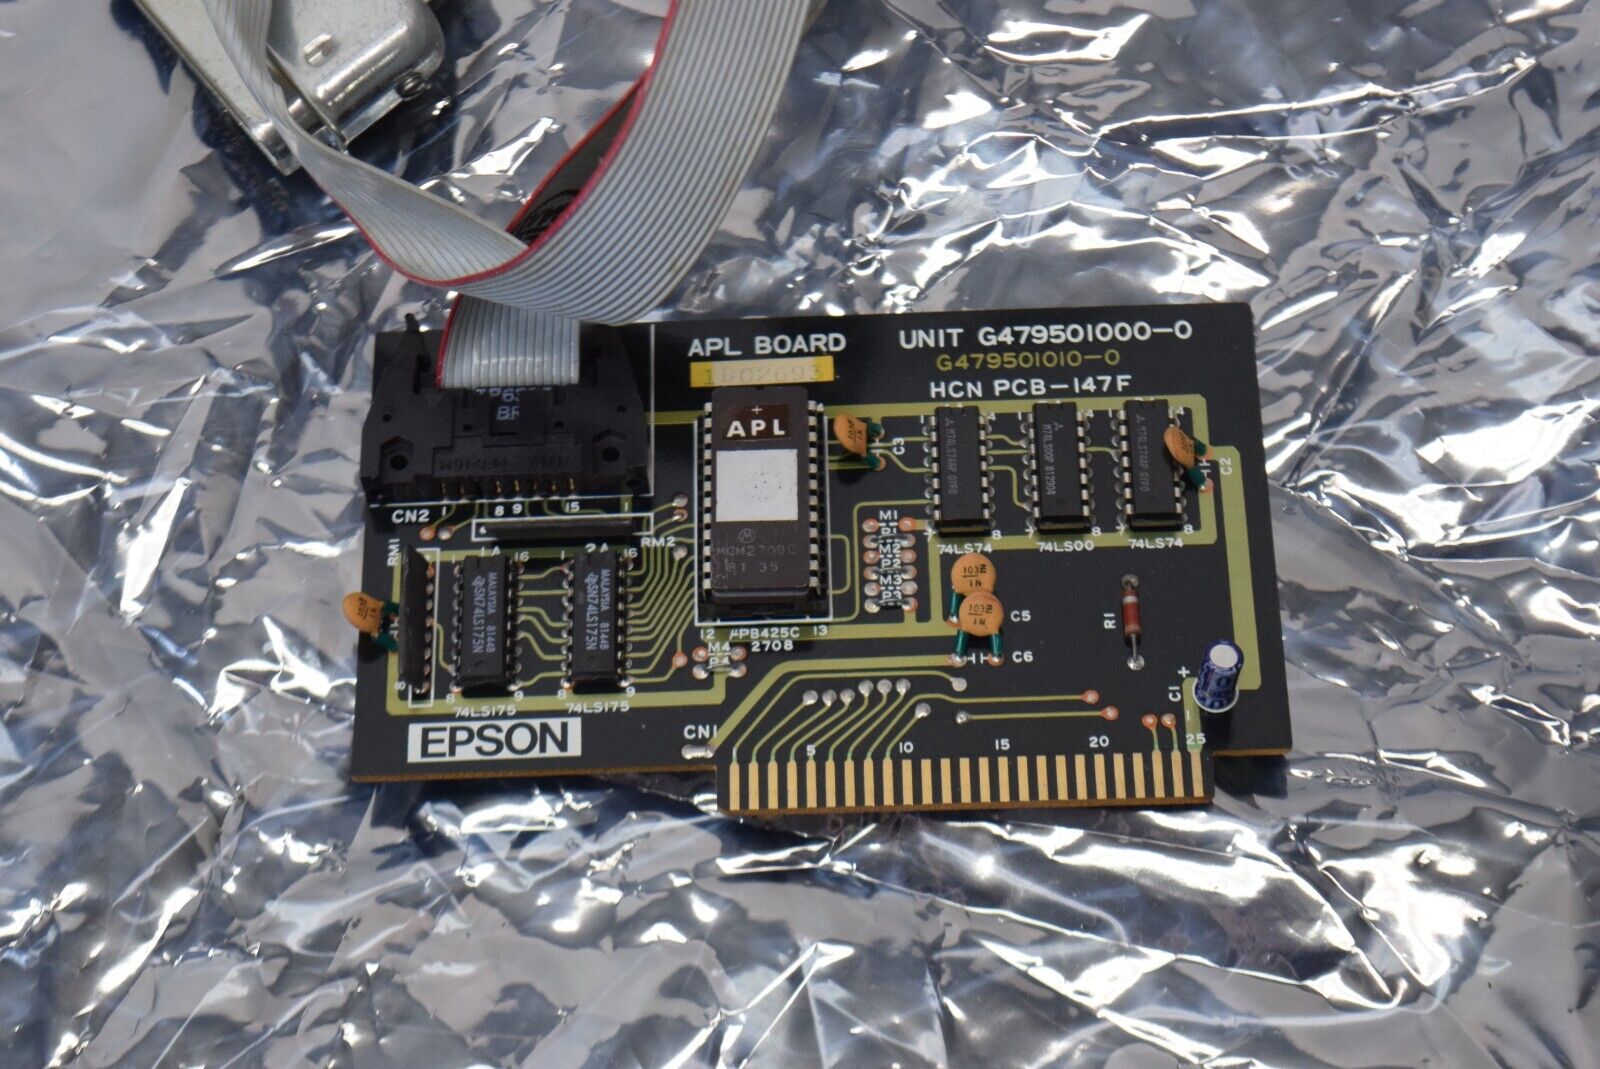 Epson APL Parallel Printer Controller Card Board for Apple II Computers